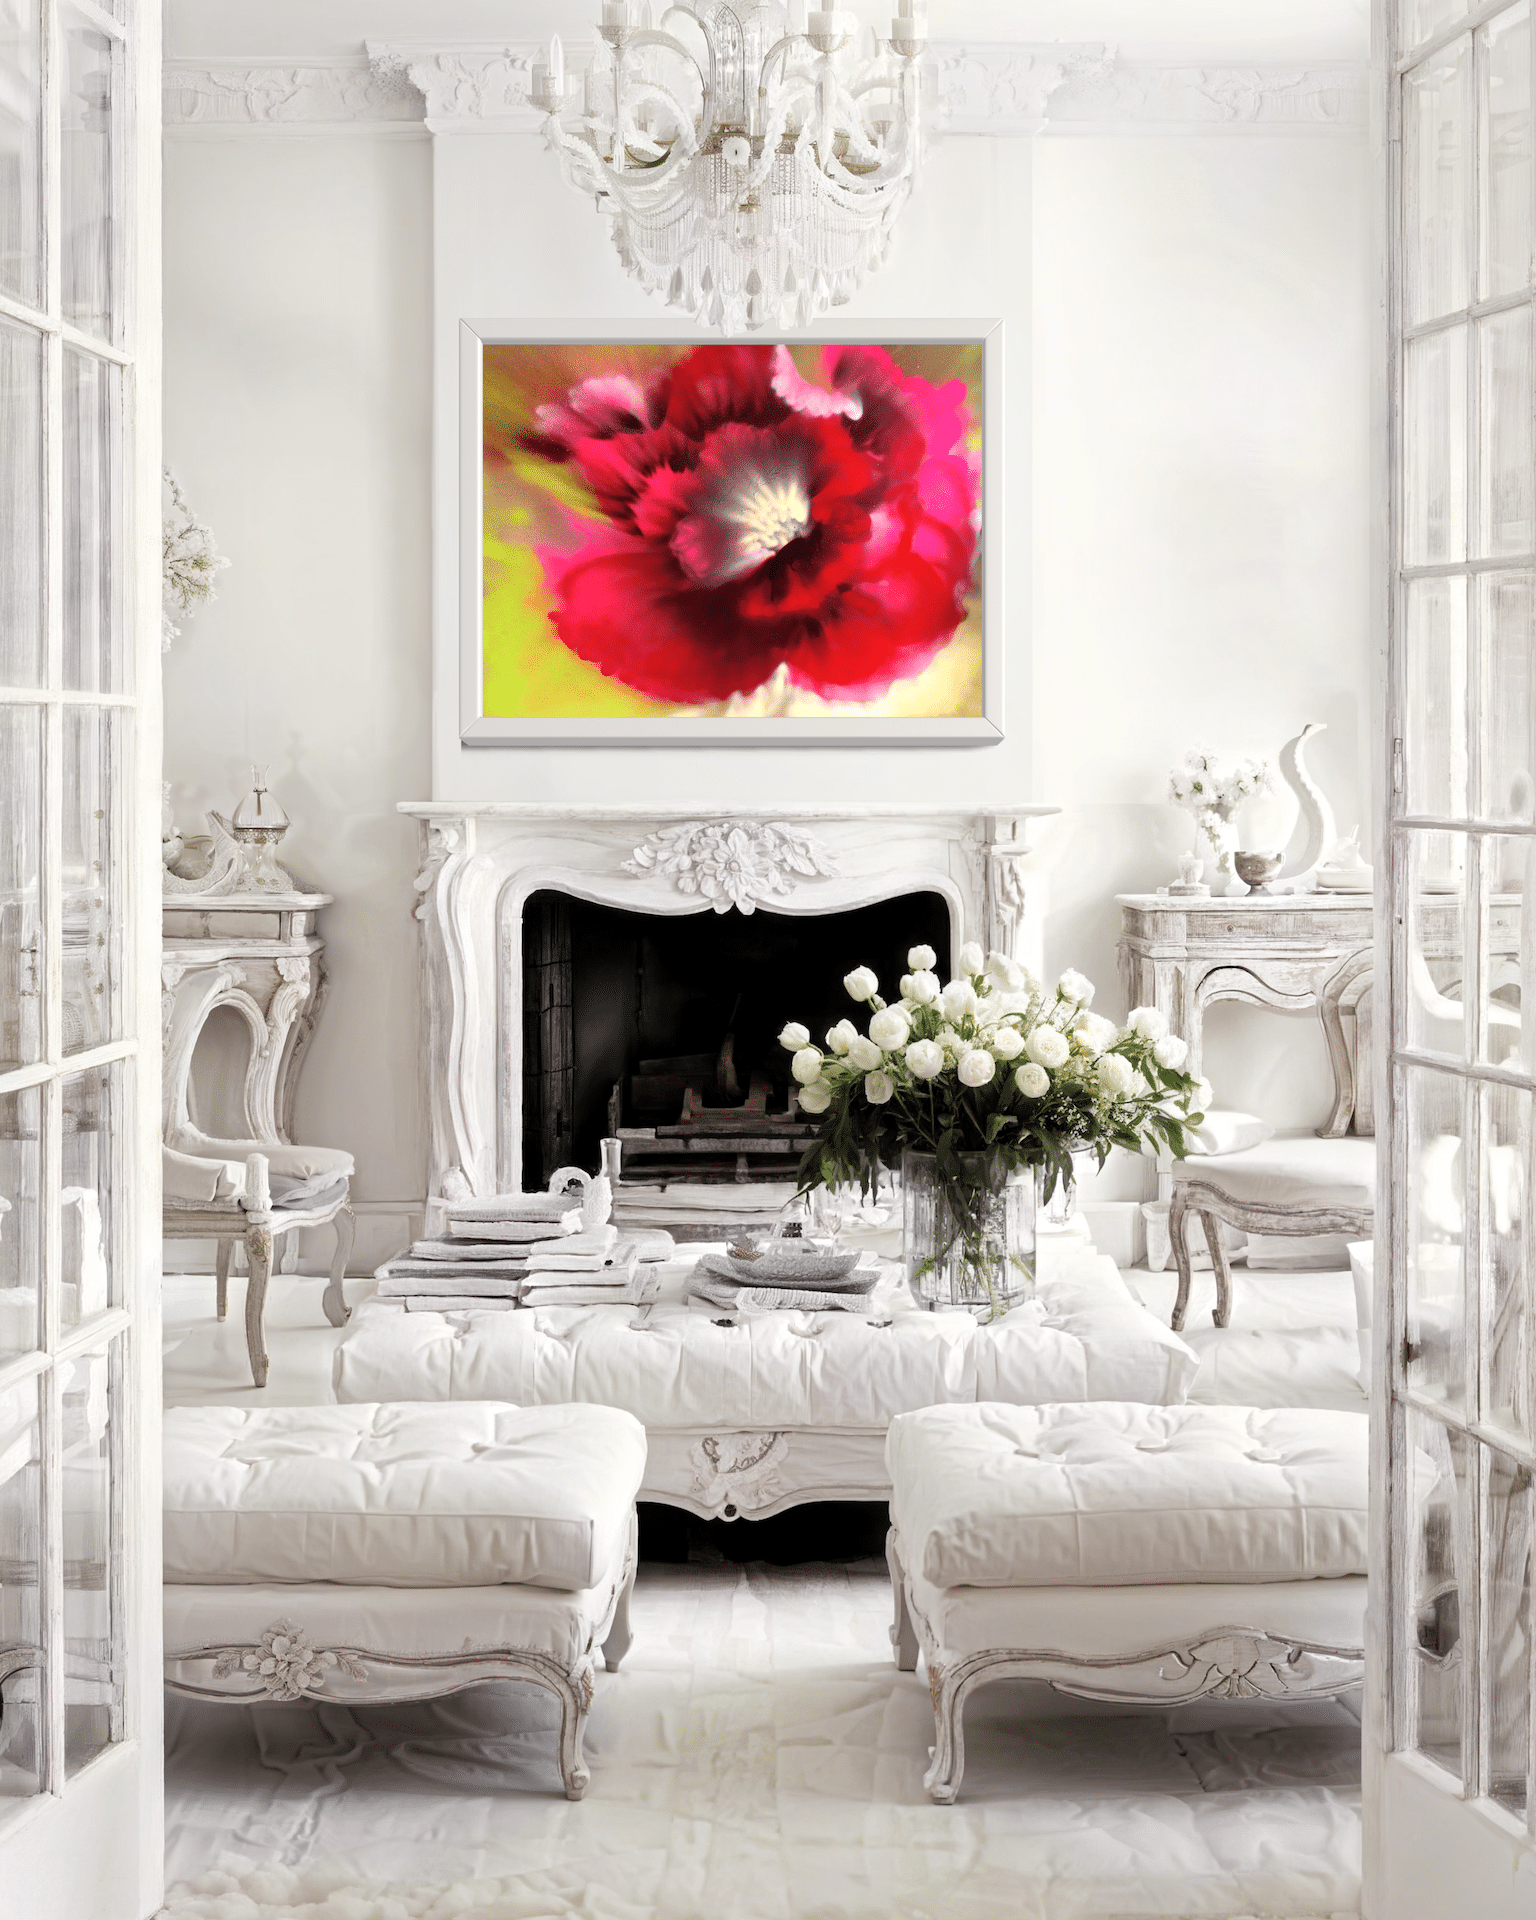 A contemporary abstract floral acrylic spray painting on metal panel by artist Cynthia McLoughlin